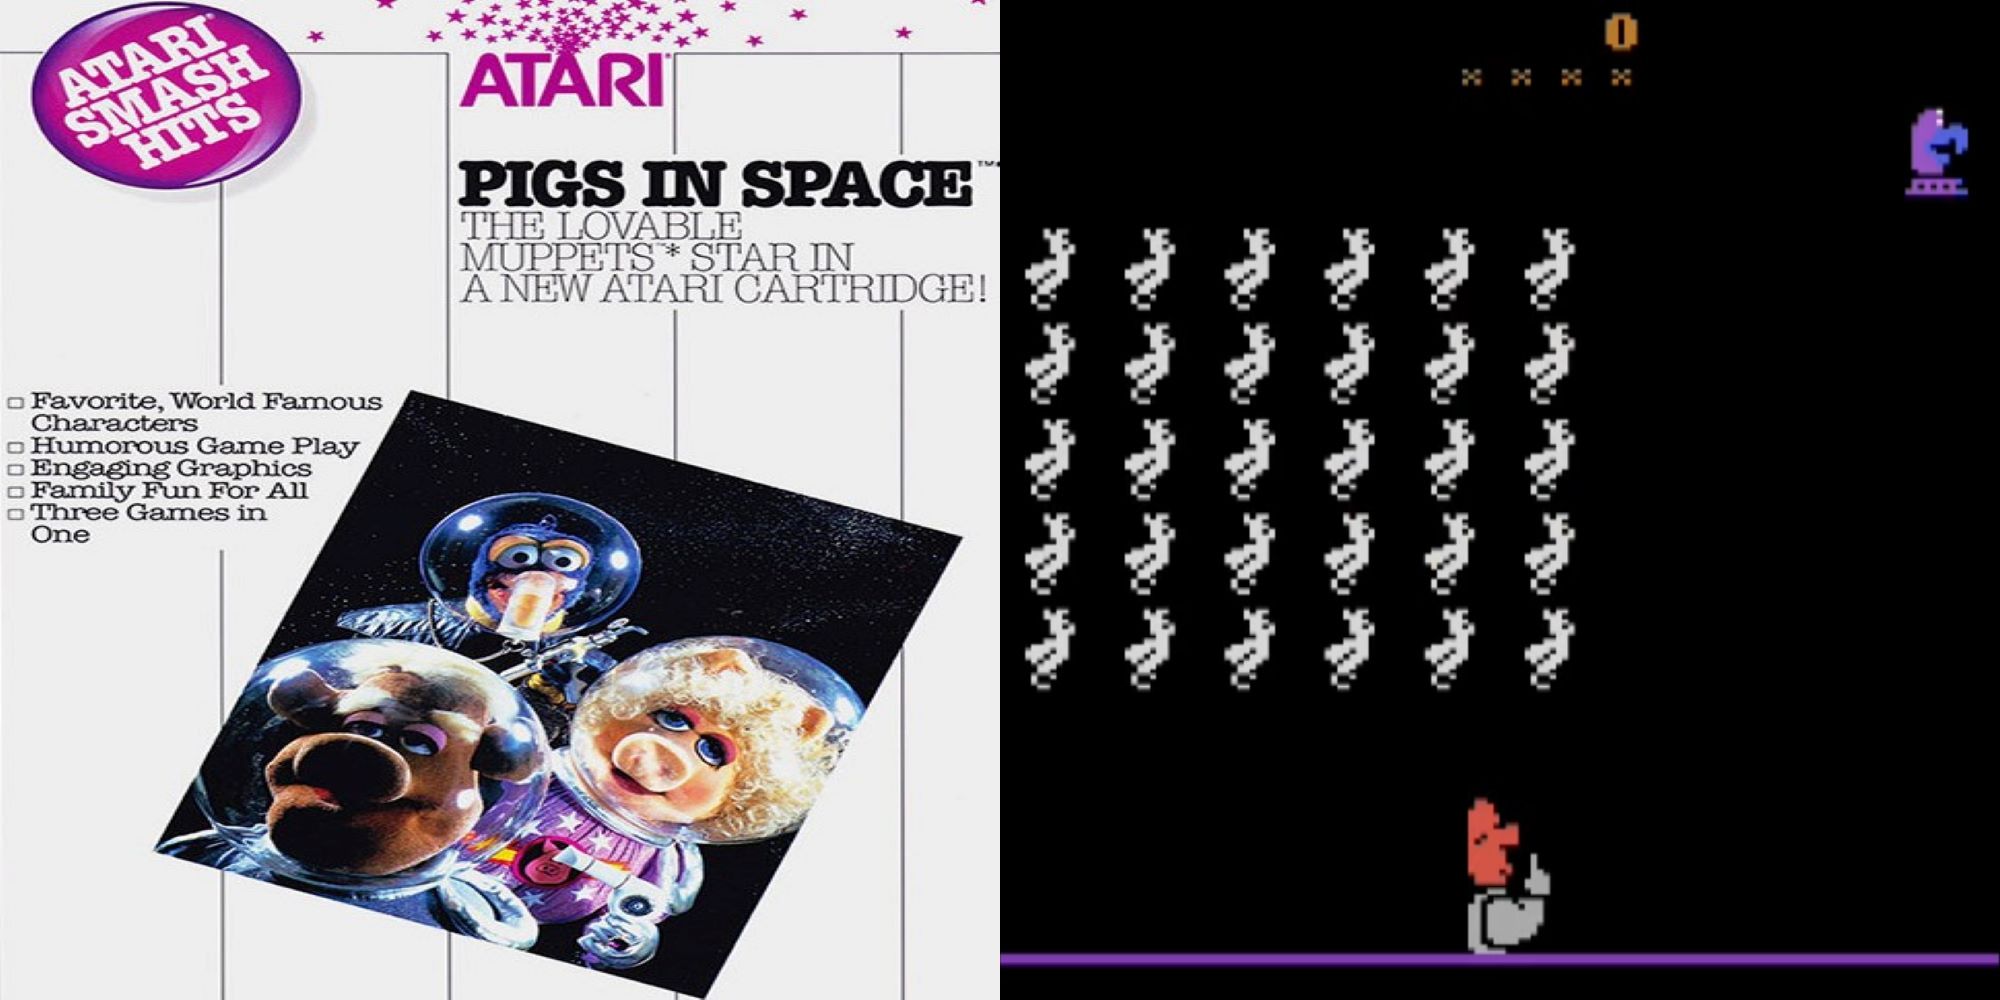 Split image Muppets The Chicken Invaders section of Pigs in Space for the Atari 2600 and a promotinal ad featuring Miss Piggy, Gonzo, and Link Hogthrob